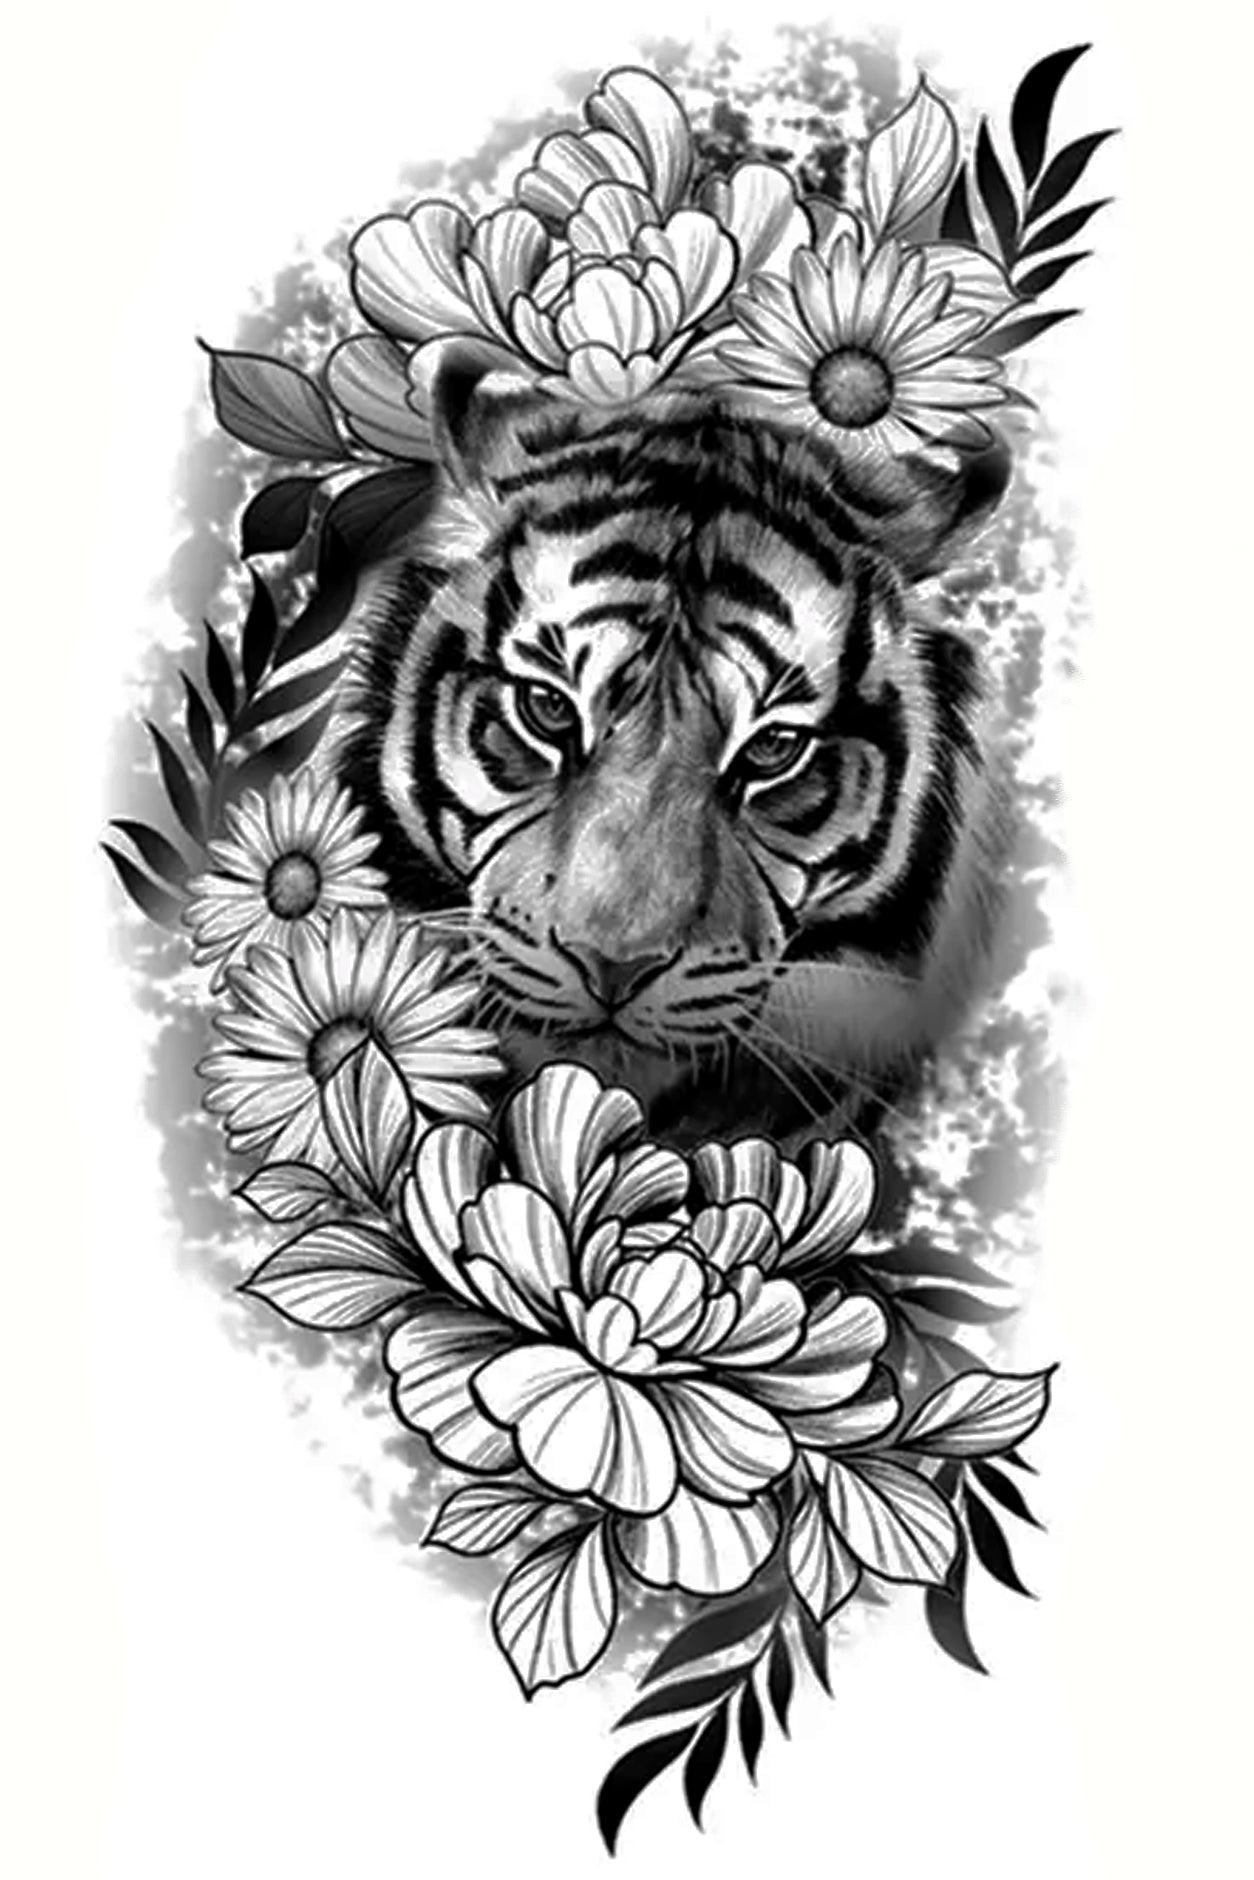 Tigers symbolize good luck, strength, cunning, majesty, independence, and immortality, contrasting with daisies representing delicacy, innocence, joy, and cheerfulness. The comparison of the two is that both have a loyal warmth. This tattoo is recommended for the arm but applies to any body part